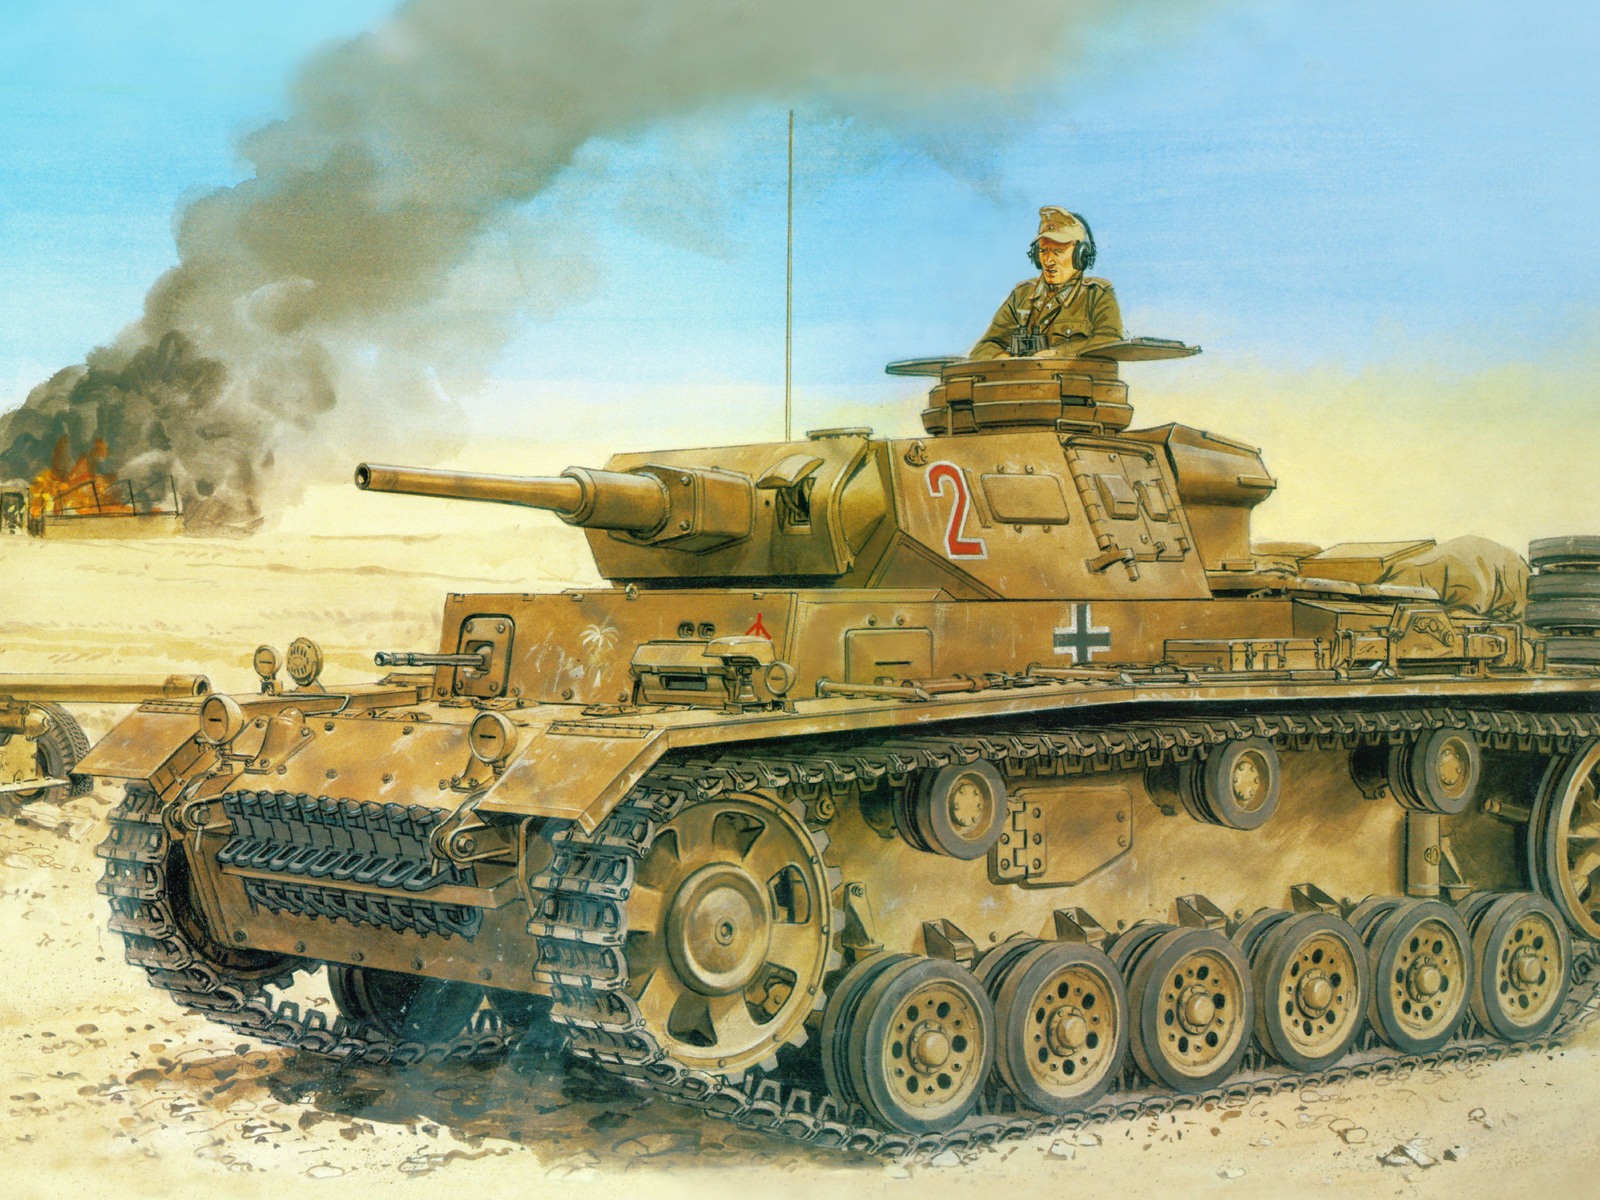 Military tanks, armored HD painting wallpapers #7 - 1600x1200